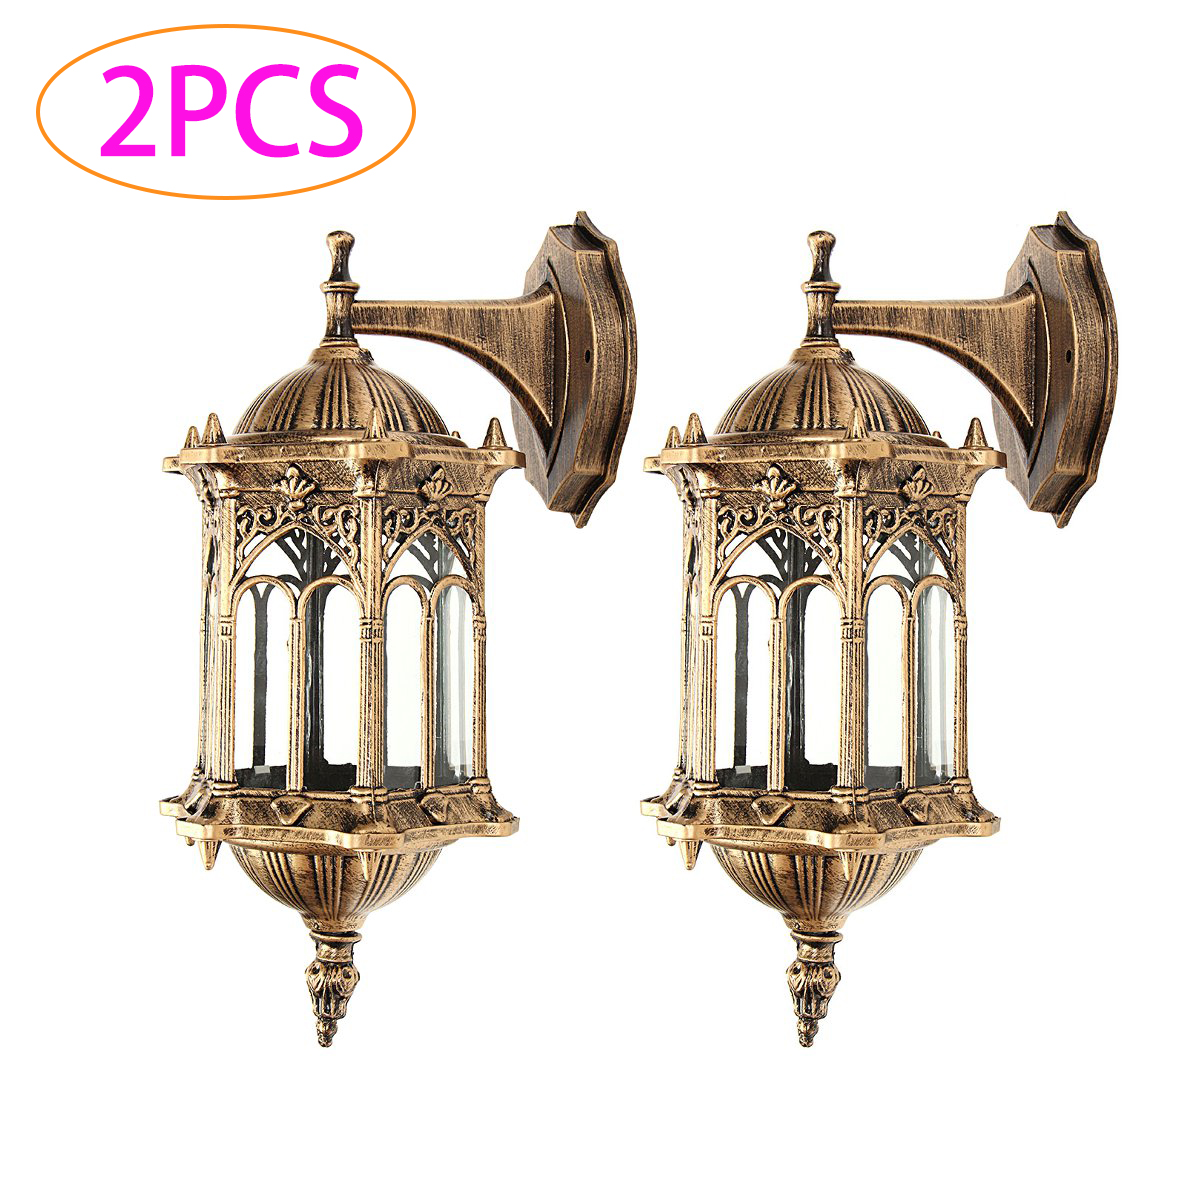 Outdoor Porch Light LED Exterior Fixtures with E26/E27 Base LED Bulb Aluminum Glass Lantern Sconce Antique Brass Wall Lamp Holder for Garden, Garage - image 1 of 7